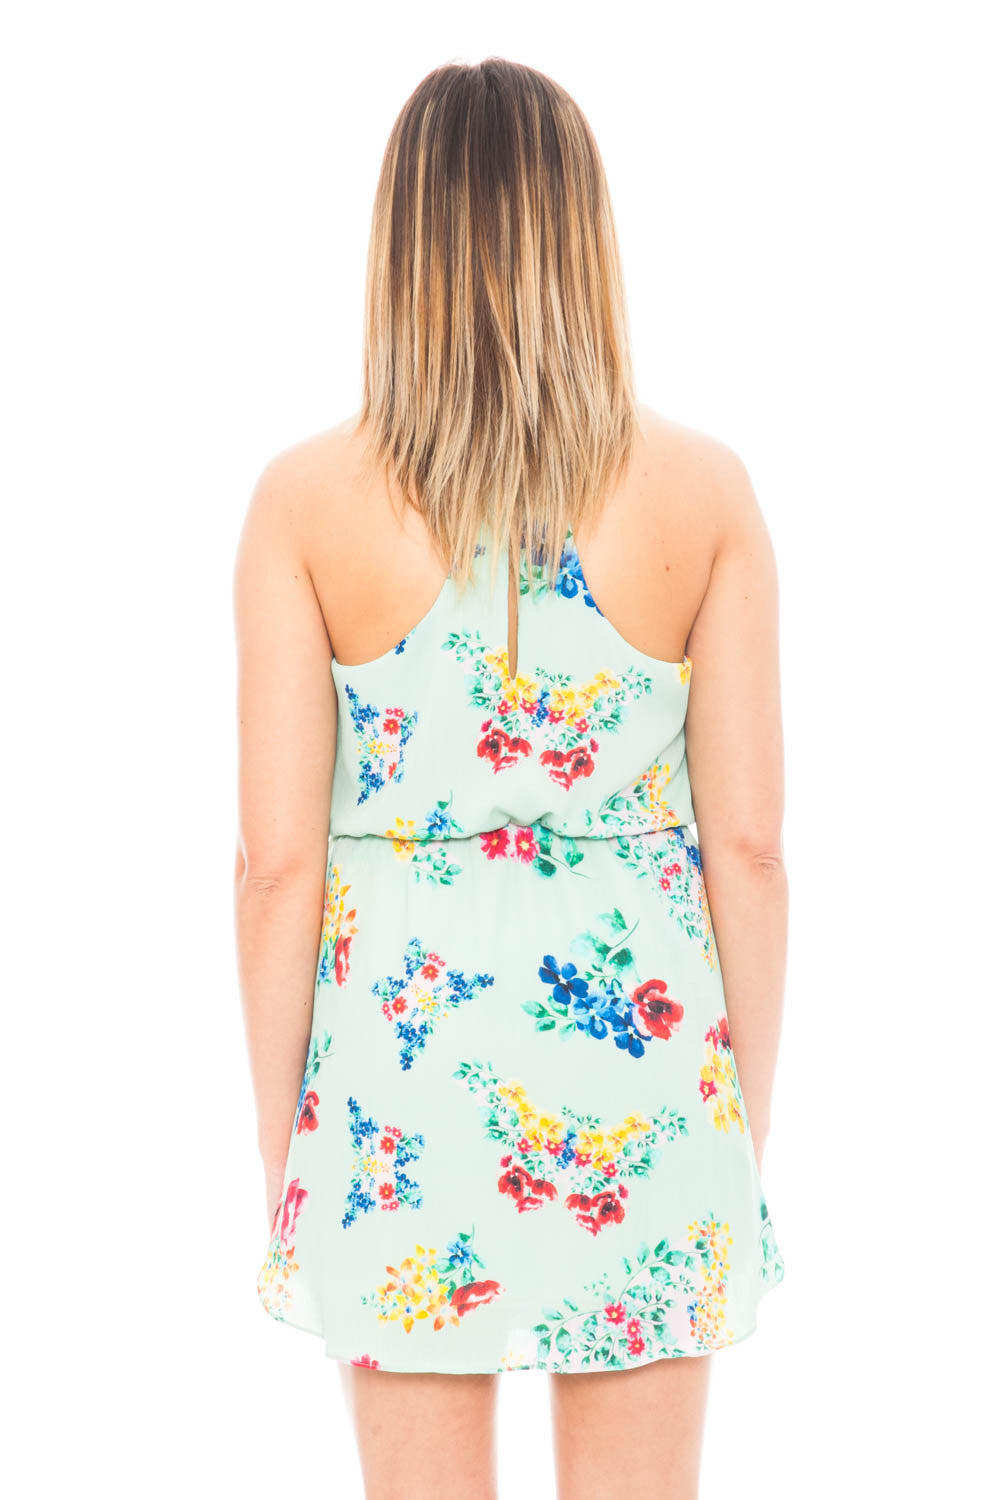 Dress - Mint Floral Chiffon Dress with Elastic Waist by Everly